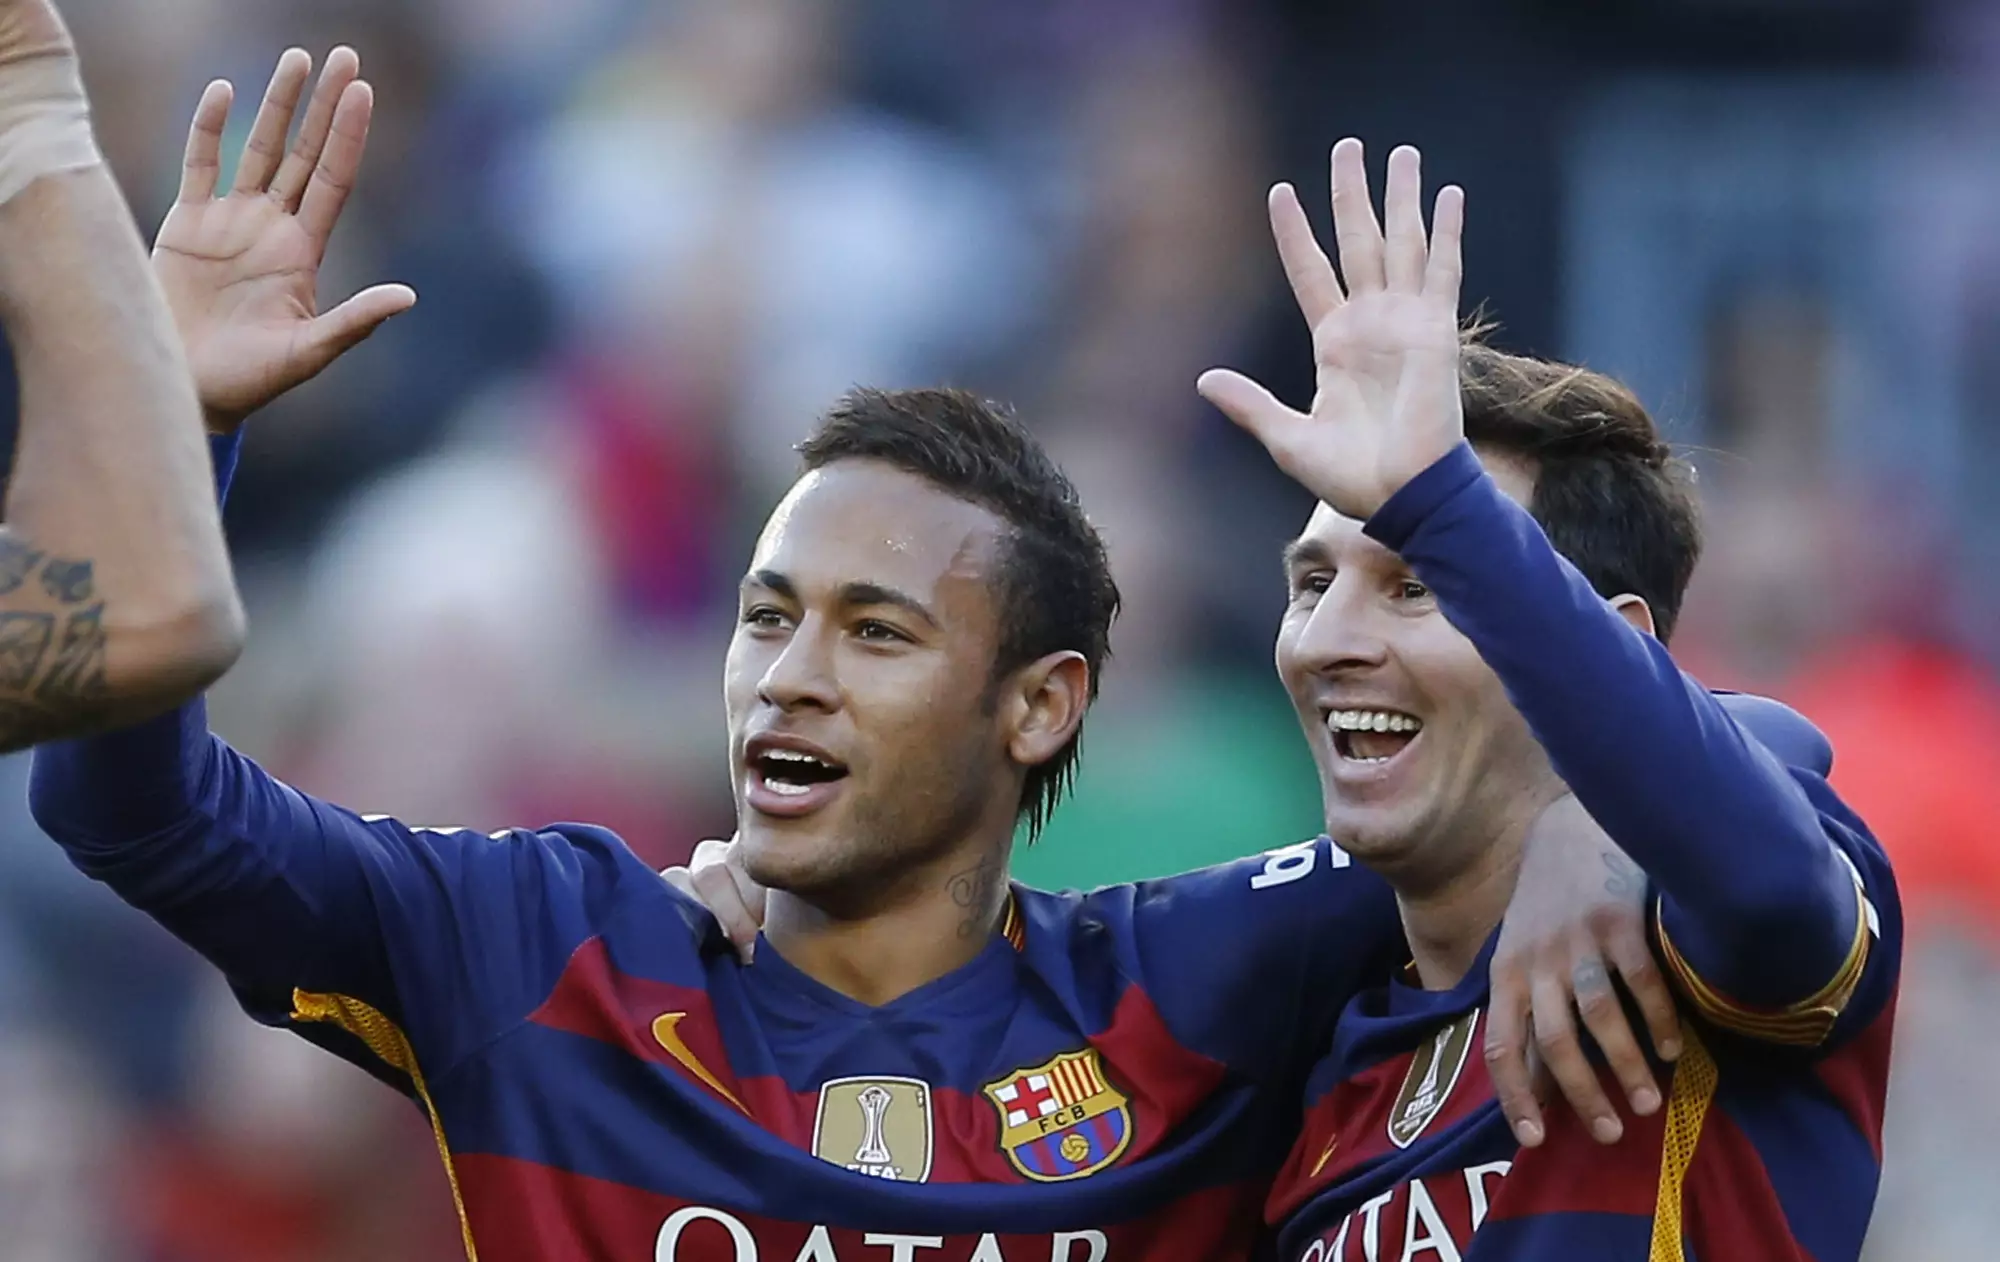 Neymar and Messi could soon be reunited. Image: PA Images